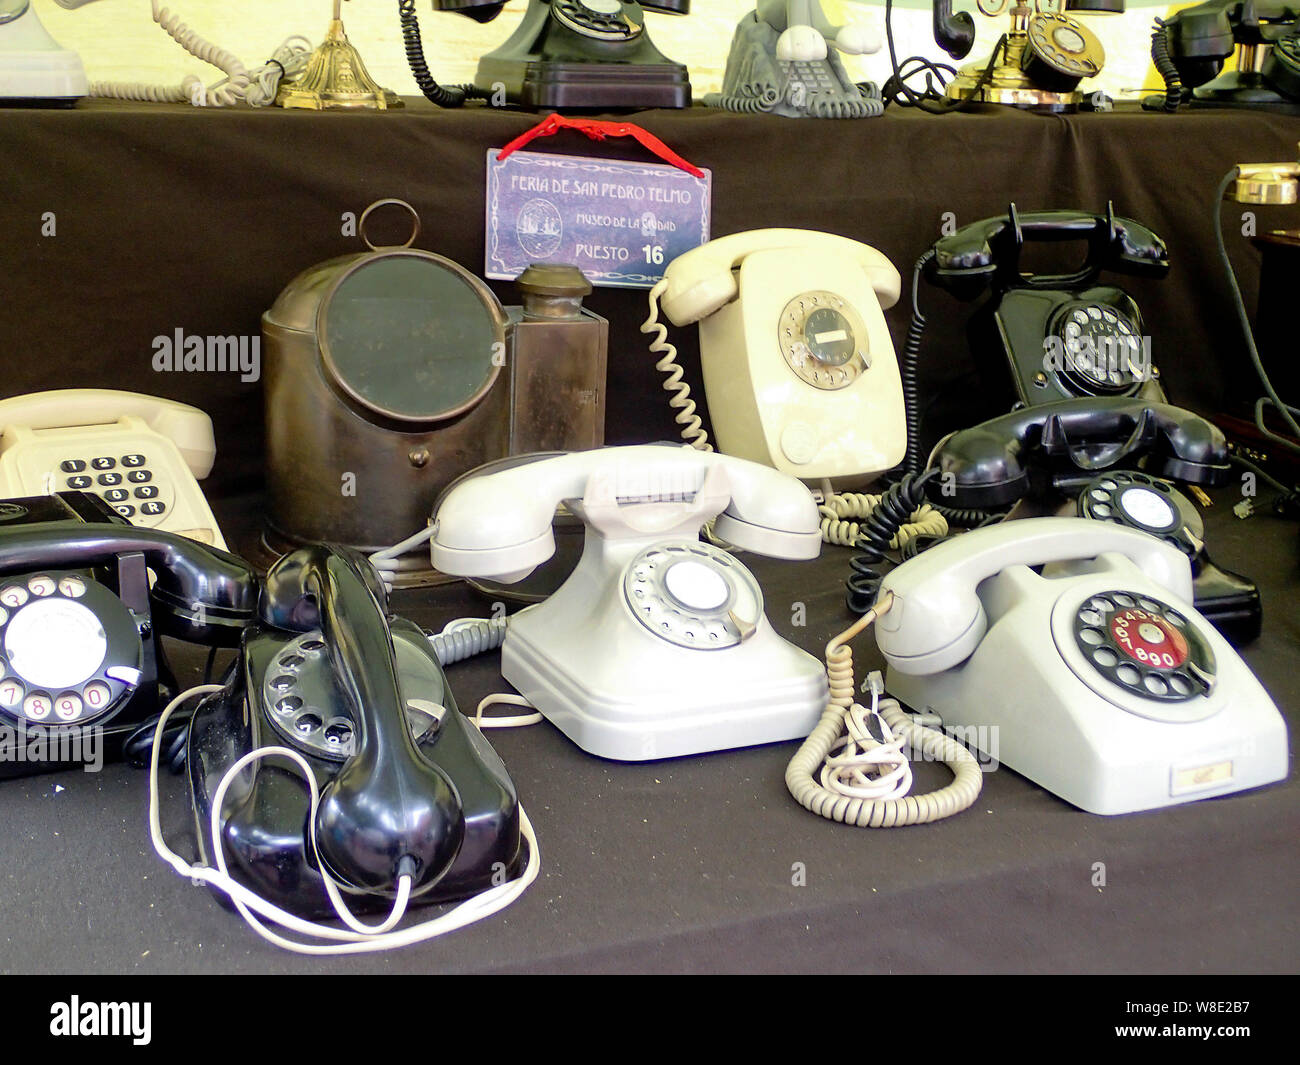 Buenos Aires, Argentina- March 4, 2013: vintage telephones in a row for selling on a flee market in San Telmo, Buenos Aires Stock Photo